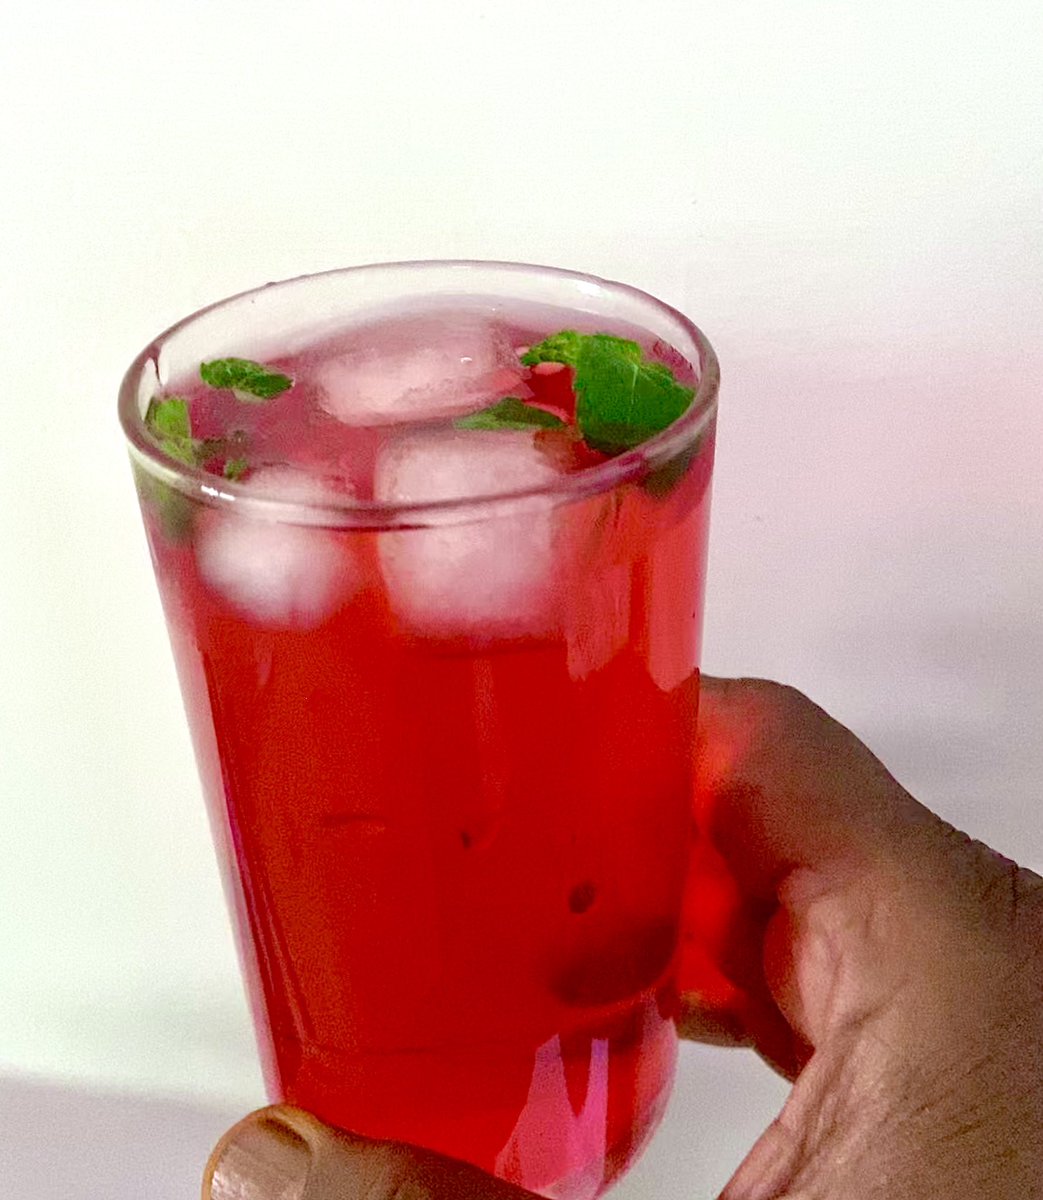 Welcoming the summer with opening of a new bottle #RoohAfza. A cool chilled Rooh Afza Sharbat with a dash of lemon, home grown mint leaves and ice cubes is the best summer drink. Enjoy the drink and beat the heat. @pratibhaprerana @jaya2004khare @suneetamehan @sumitdookia